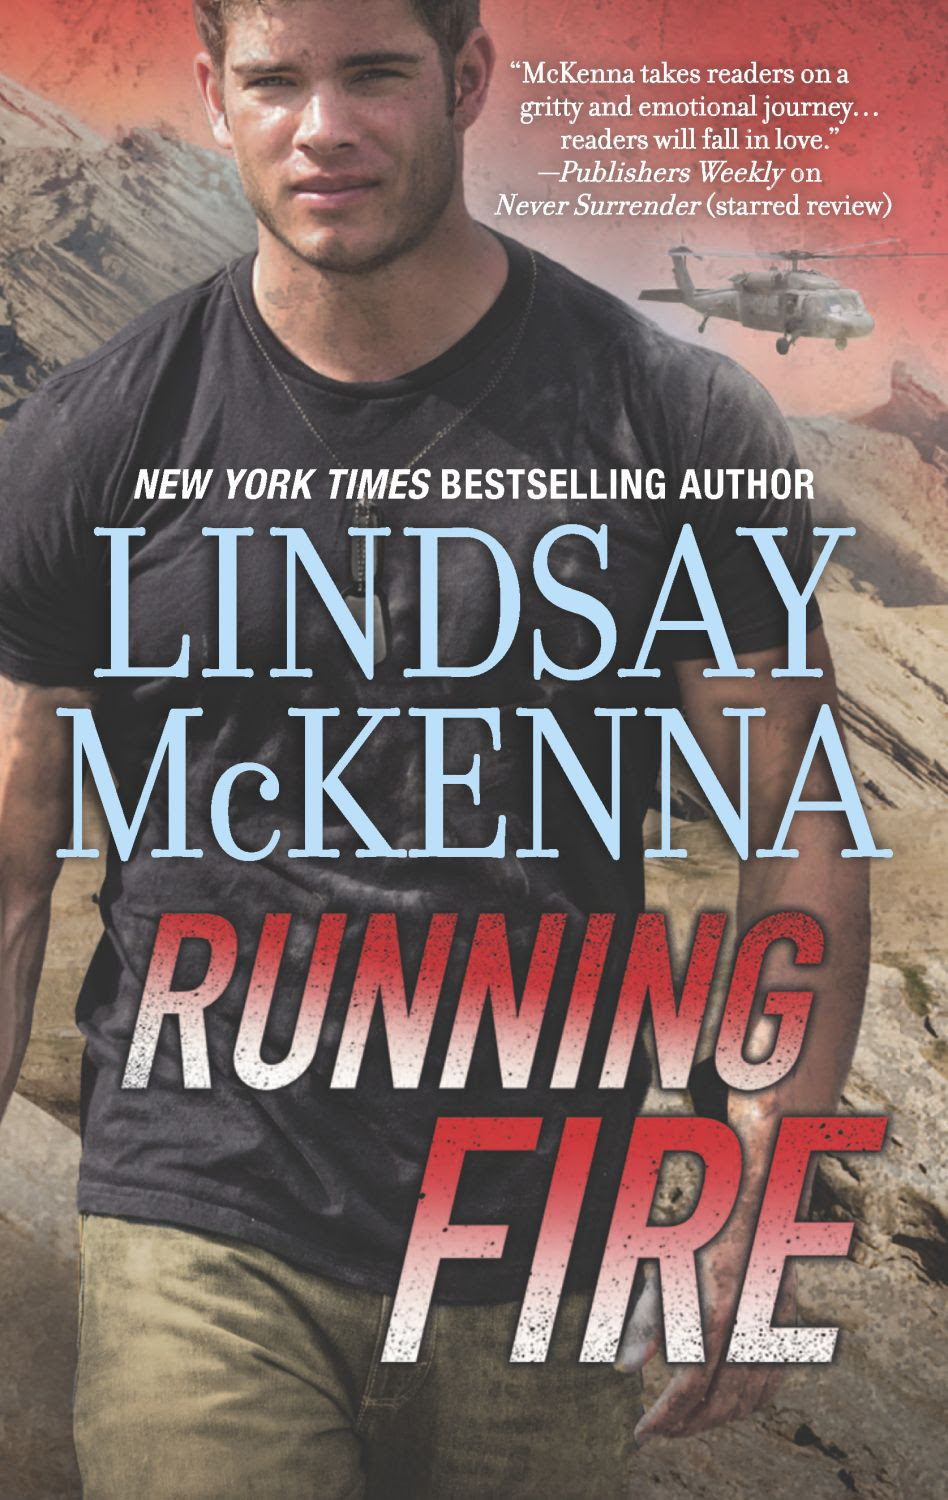 http://tlcbooktours.com/wp-content/uploads/2015/02/Running-Fire-by-Lindsay-McKenna_book-cover.jpg